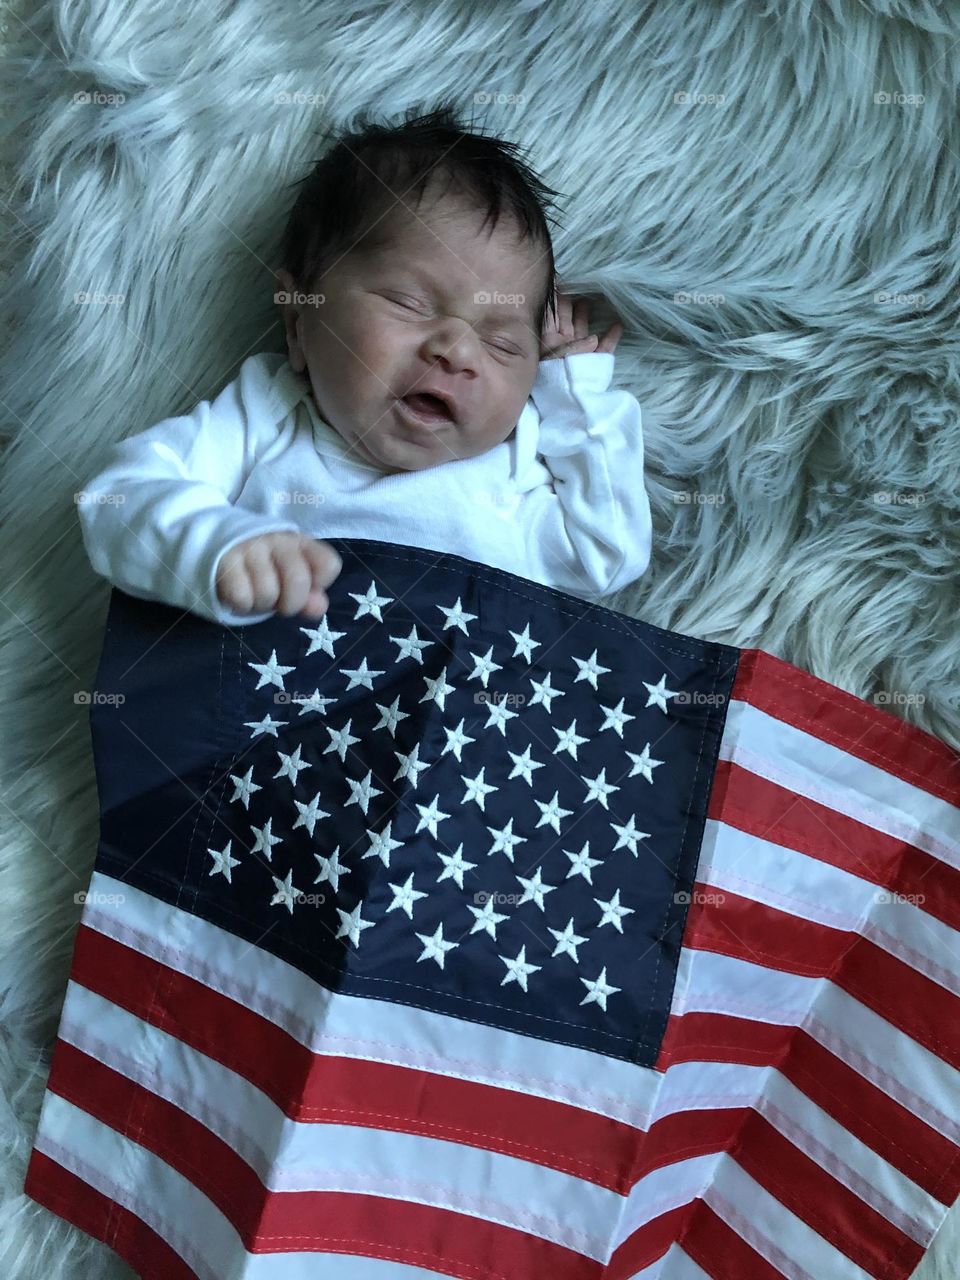 Baby sleeping with United States of America flag, cute baby with USA flag, American baby photo, celebrating 4th of July, celebrating voting in America, baby and democracy, infant with American flag 